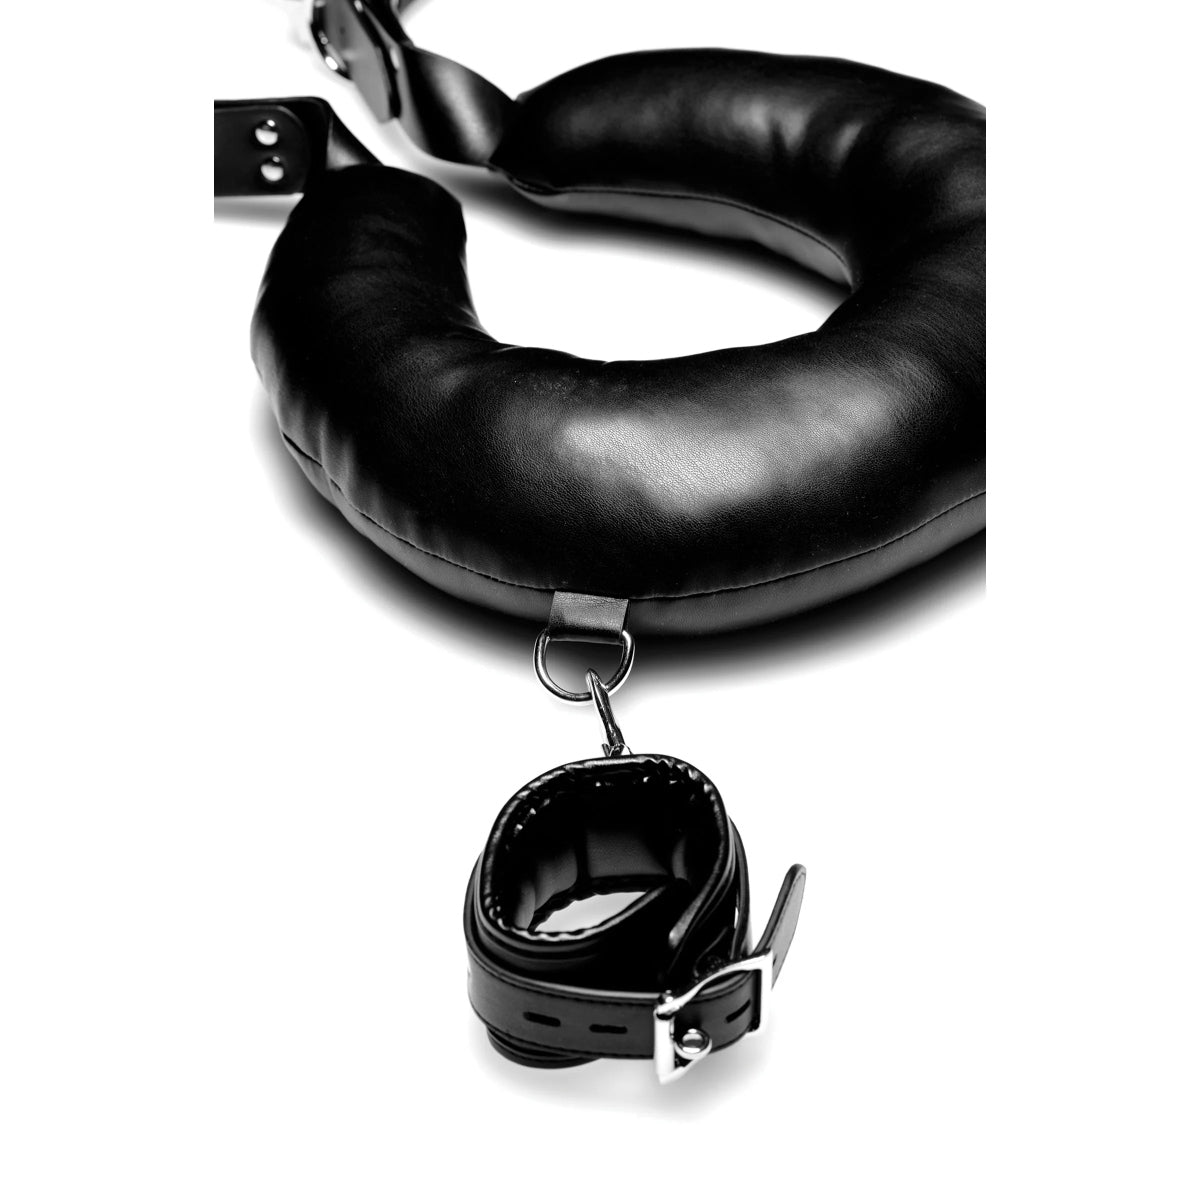 Strict Padded Thigh Sling With Wrist Cuffs Black